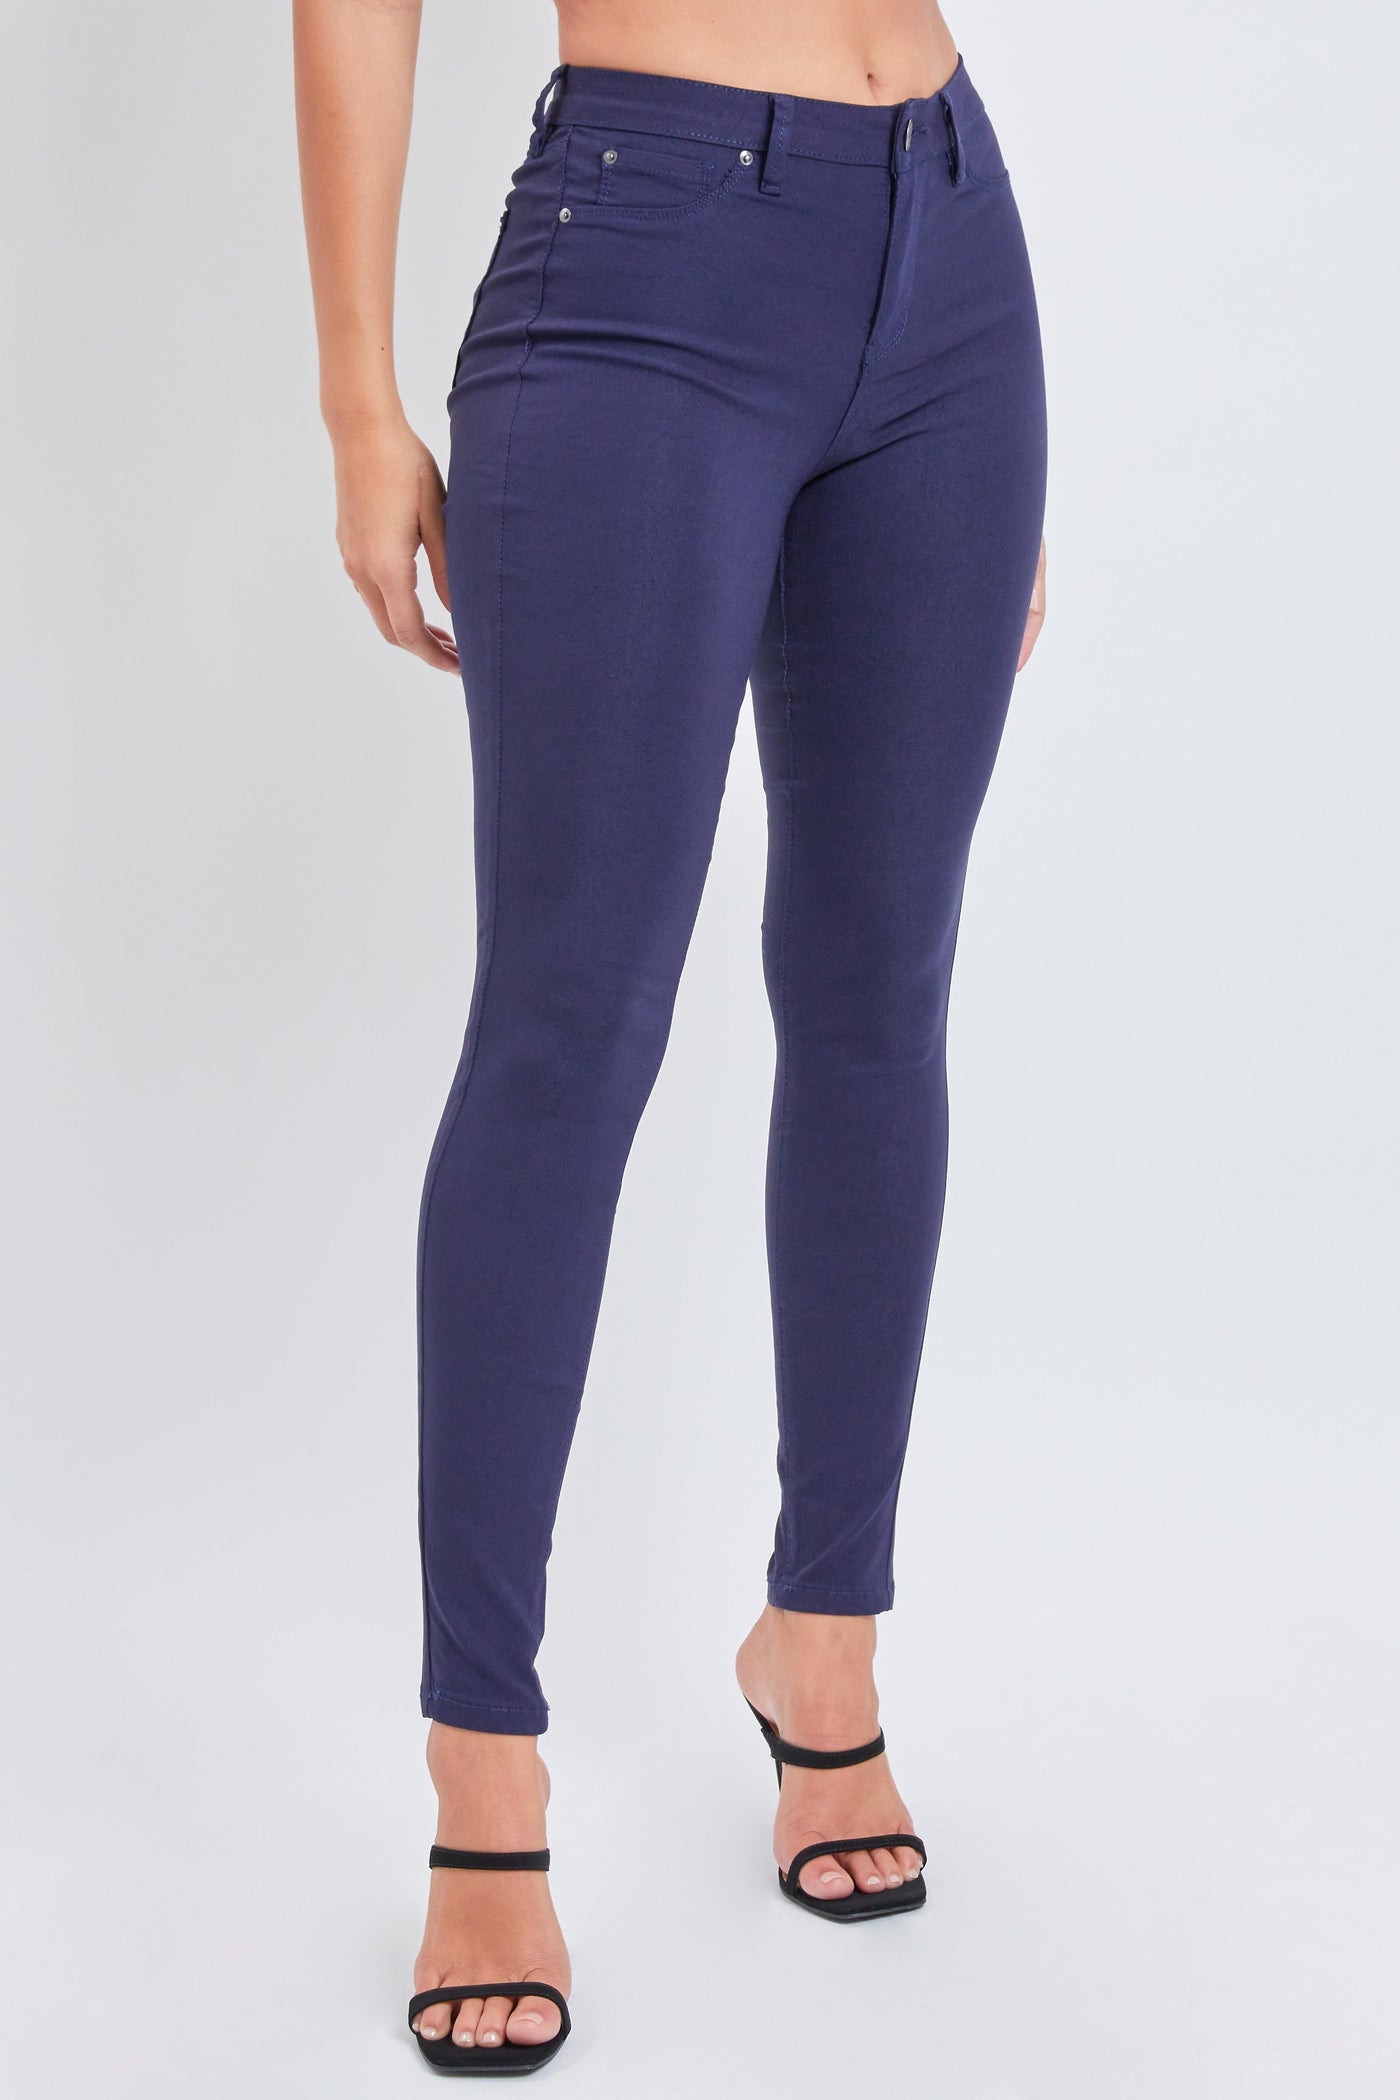 Junior Hyperstretch Forever Color Mid Rise Skinny Jean P748931